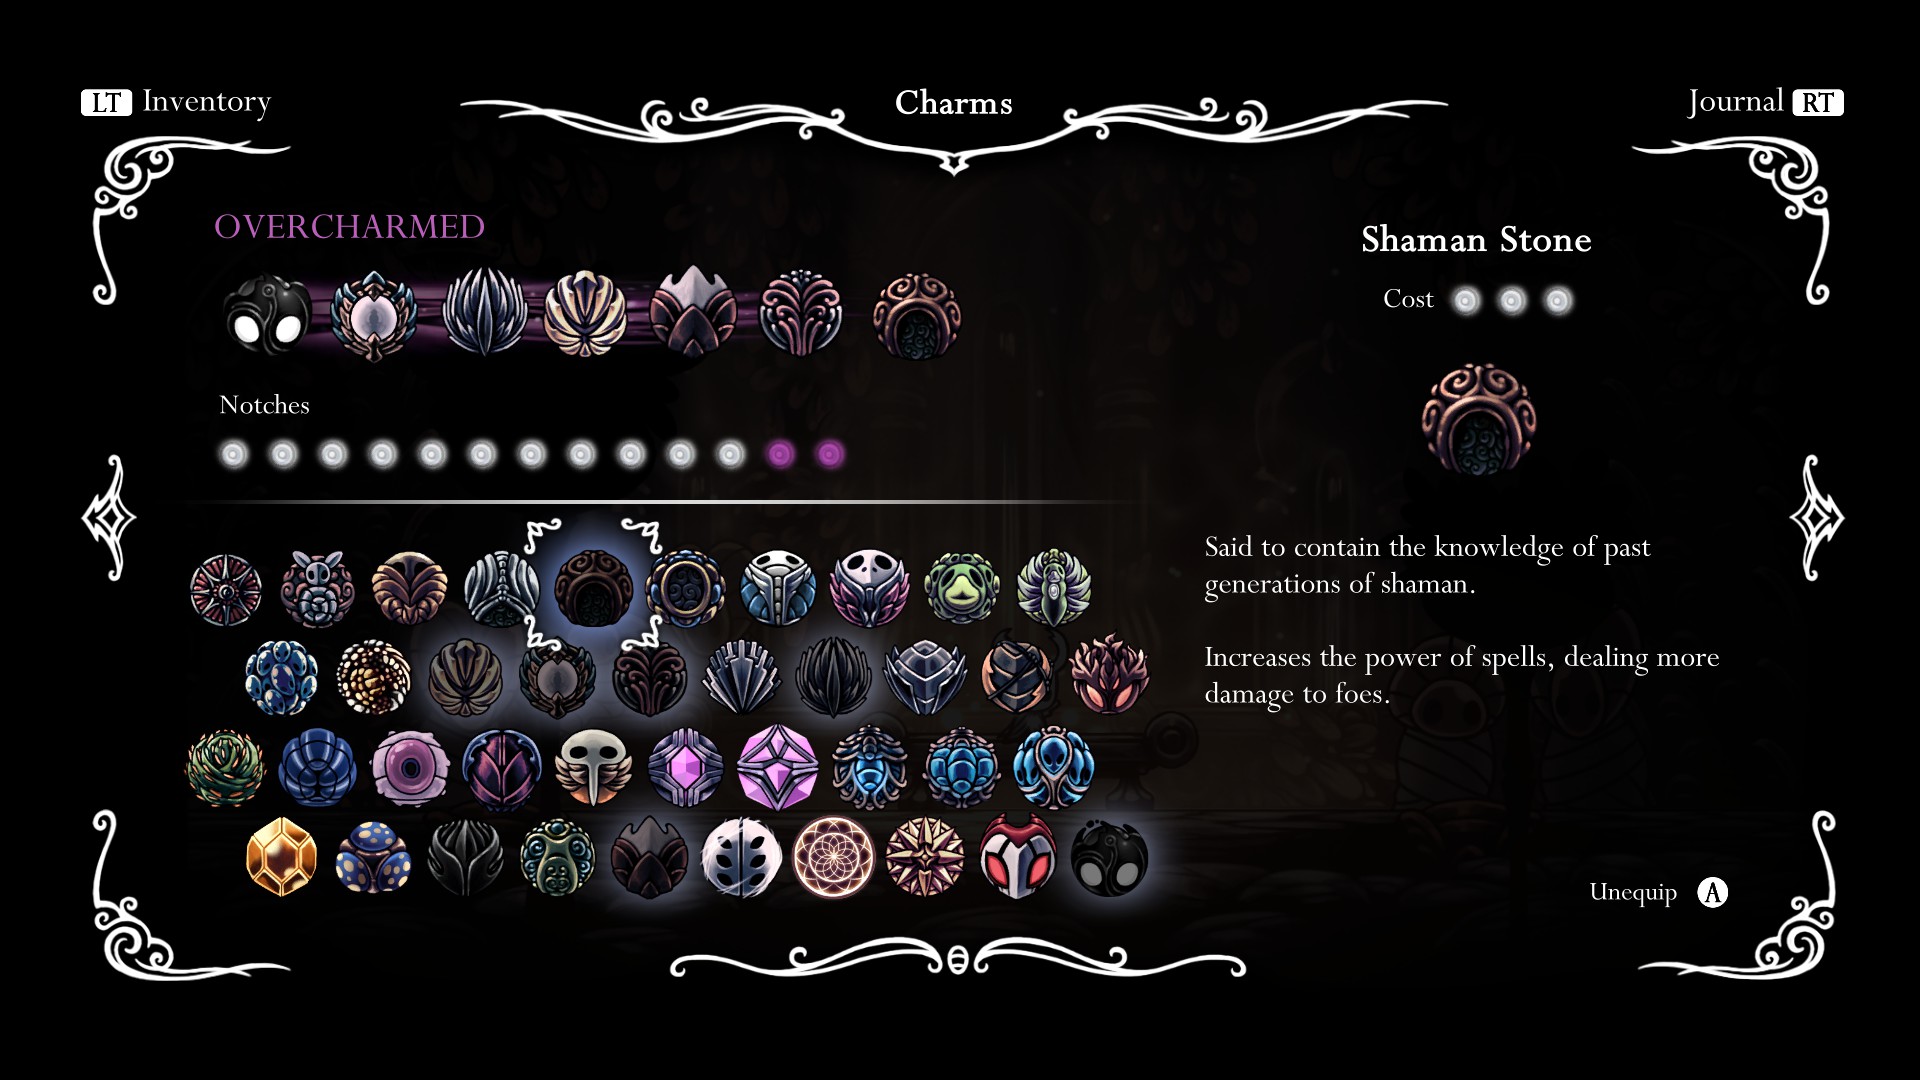 Hollow Knight Charms Strategy & Builds Guide - Overcharming - FC0D01A